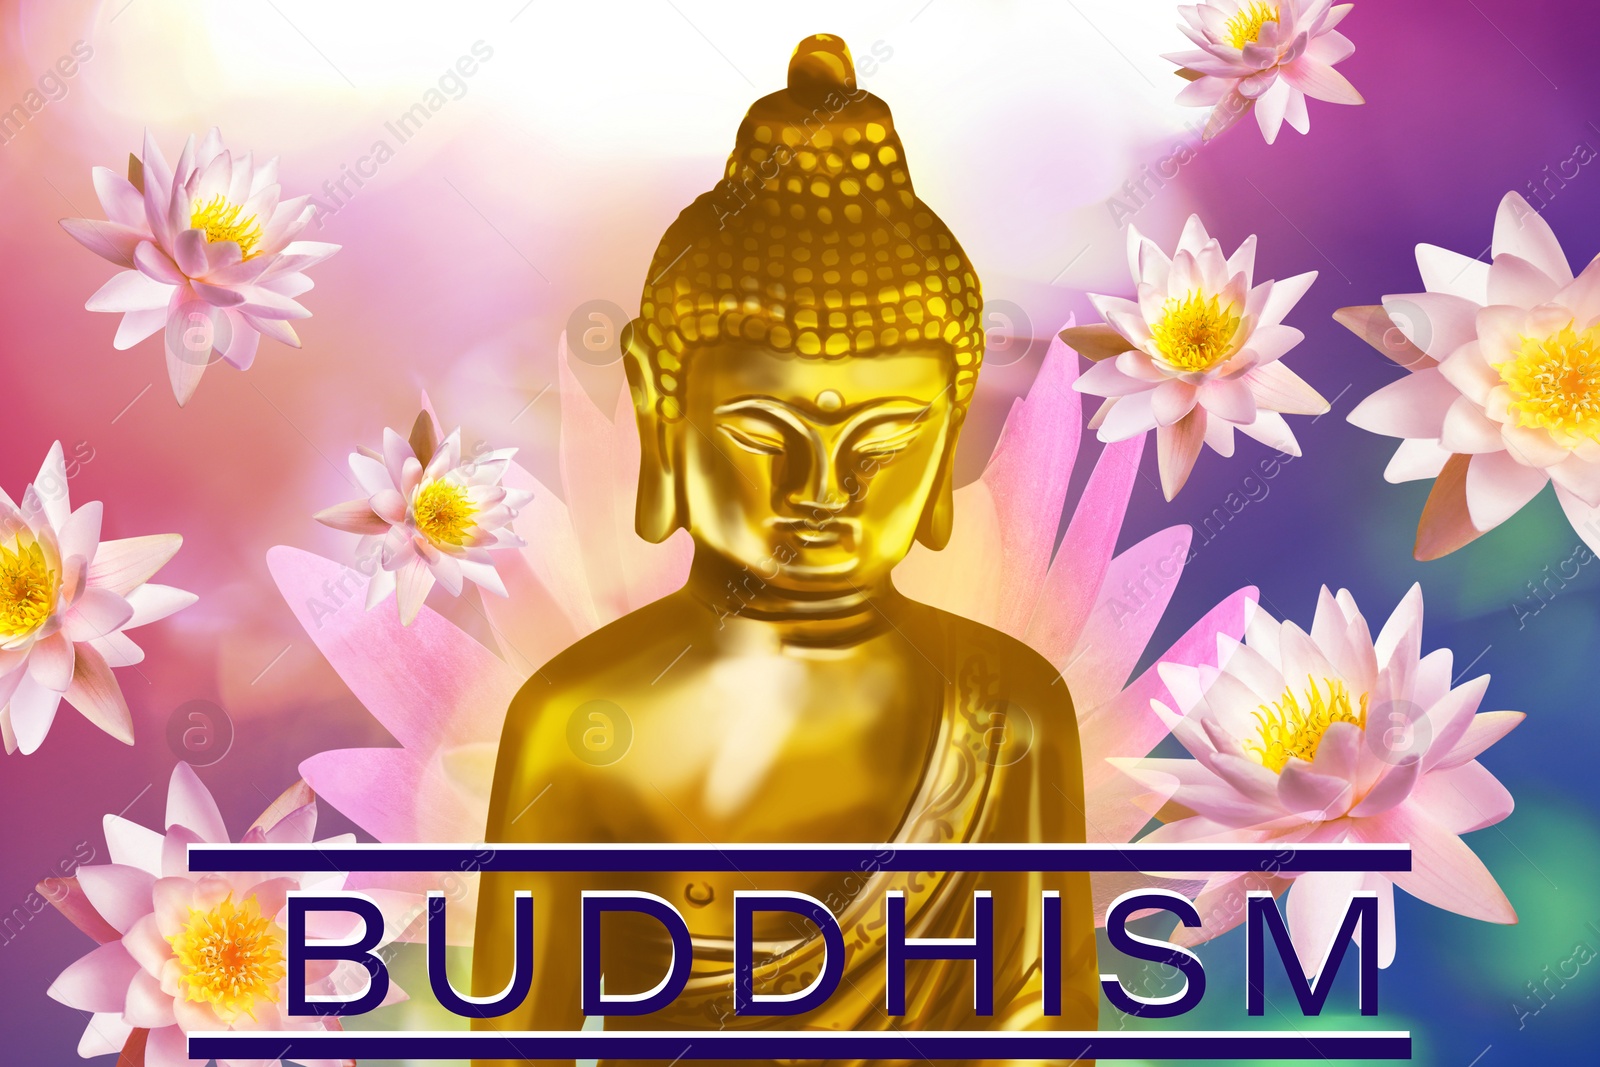 Image of Buddhism. Golden Buddha figure surrounded by lotus flowers on bright background